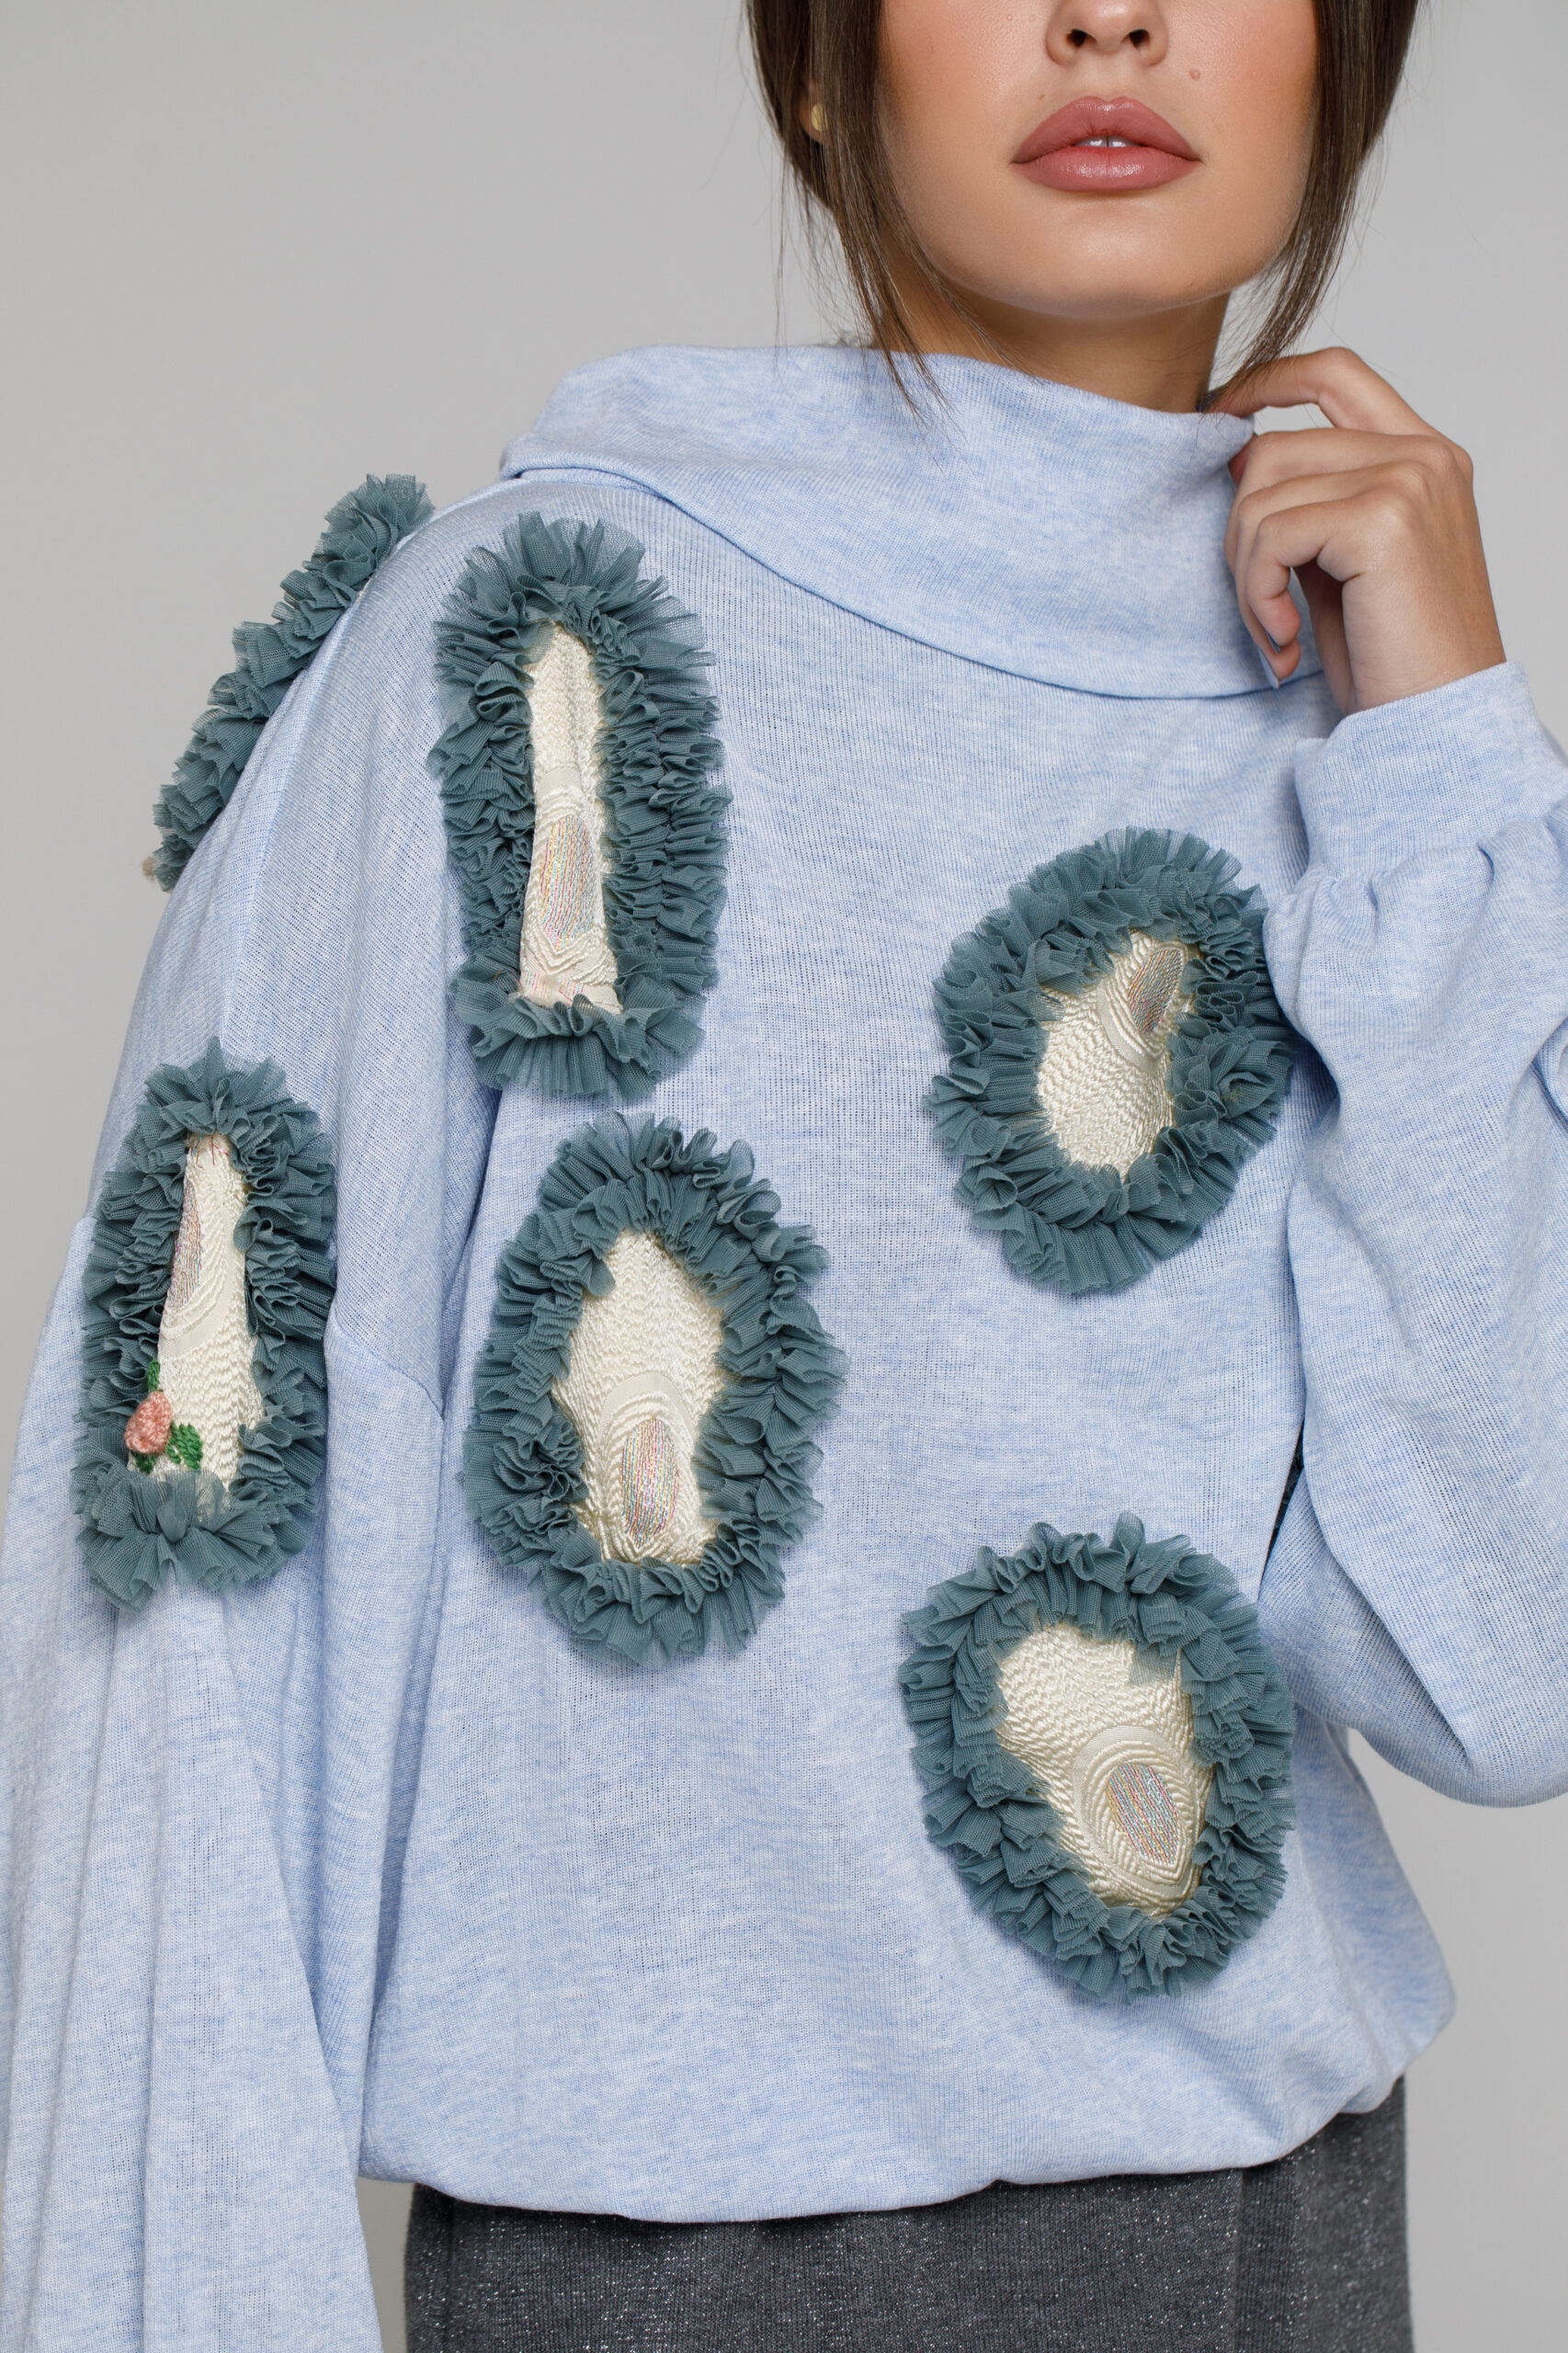 LIVY BLUE SWEATER with brocade and gray tulle applications. Natural fabrics, original design, handmade embroidery